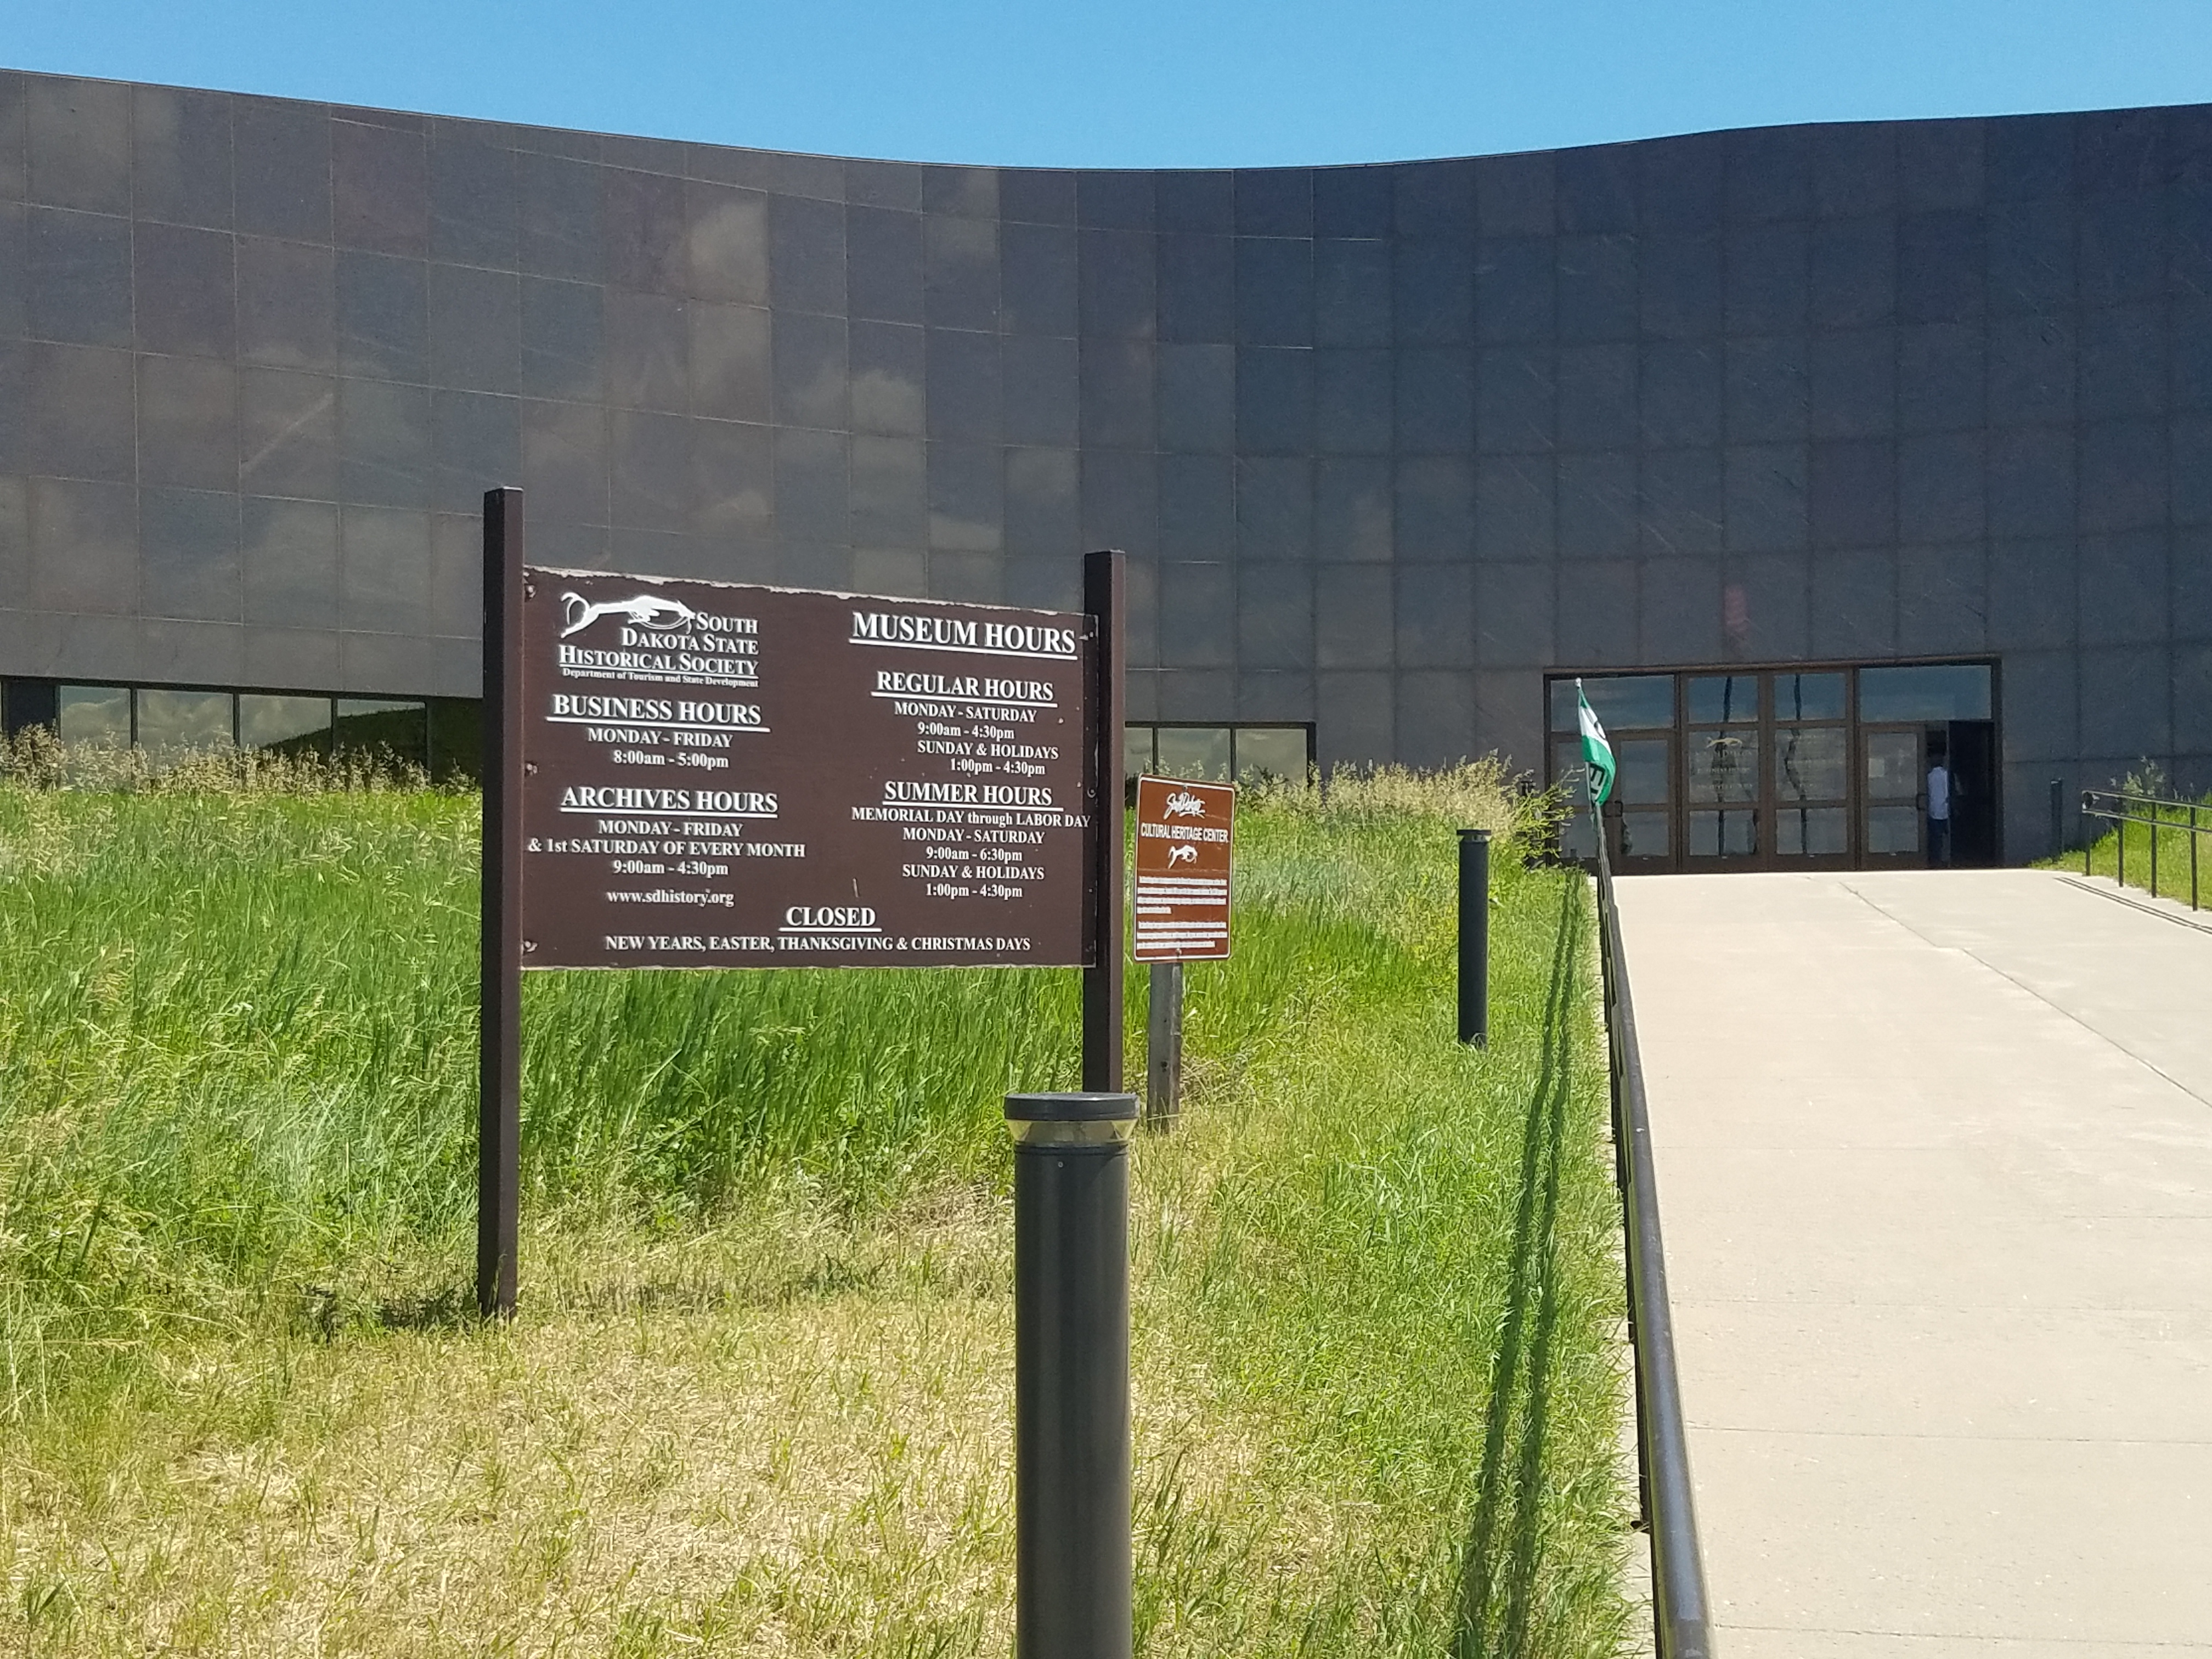 This Weekend Marks Final Weekend Before Cultural Heritage Center Closes For Renovation